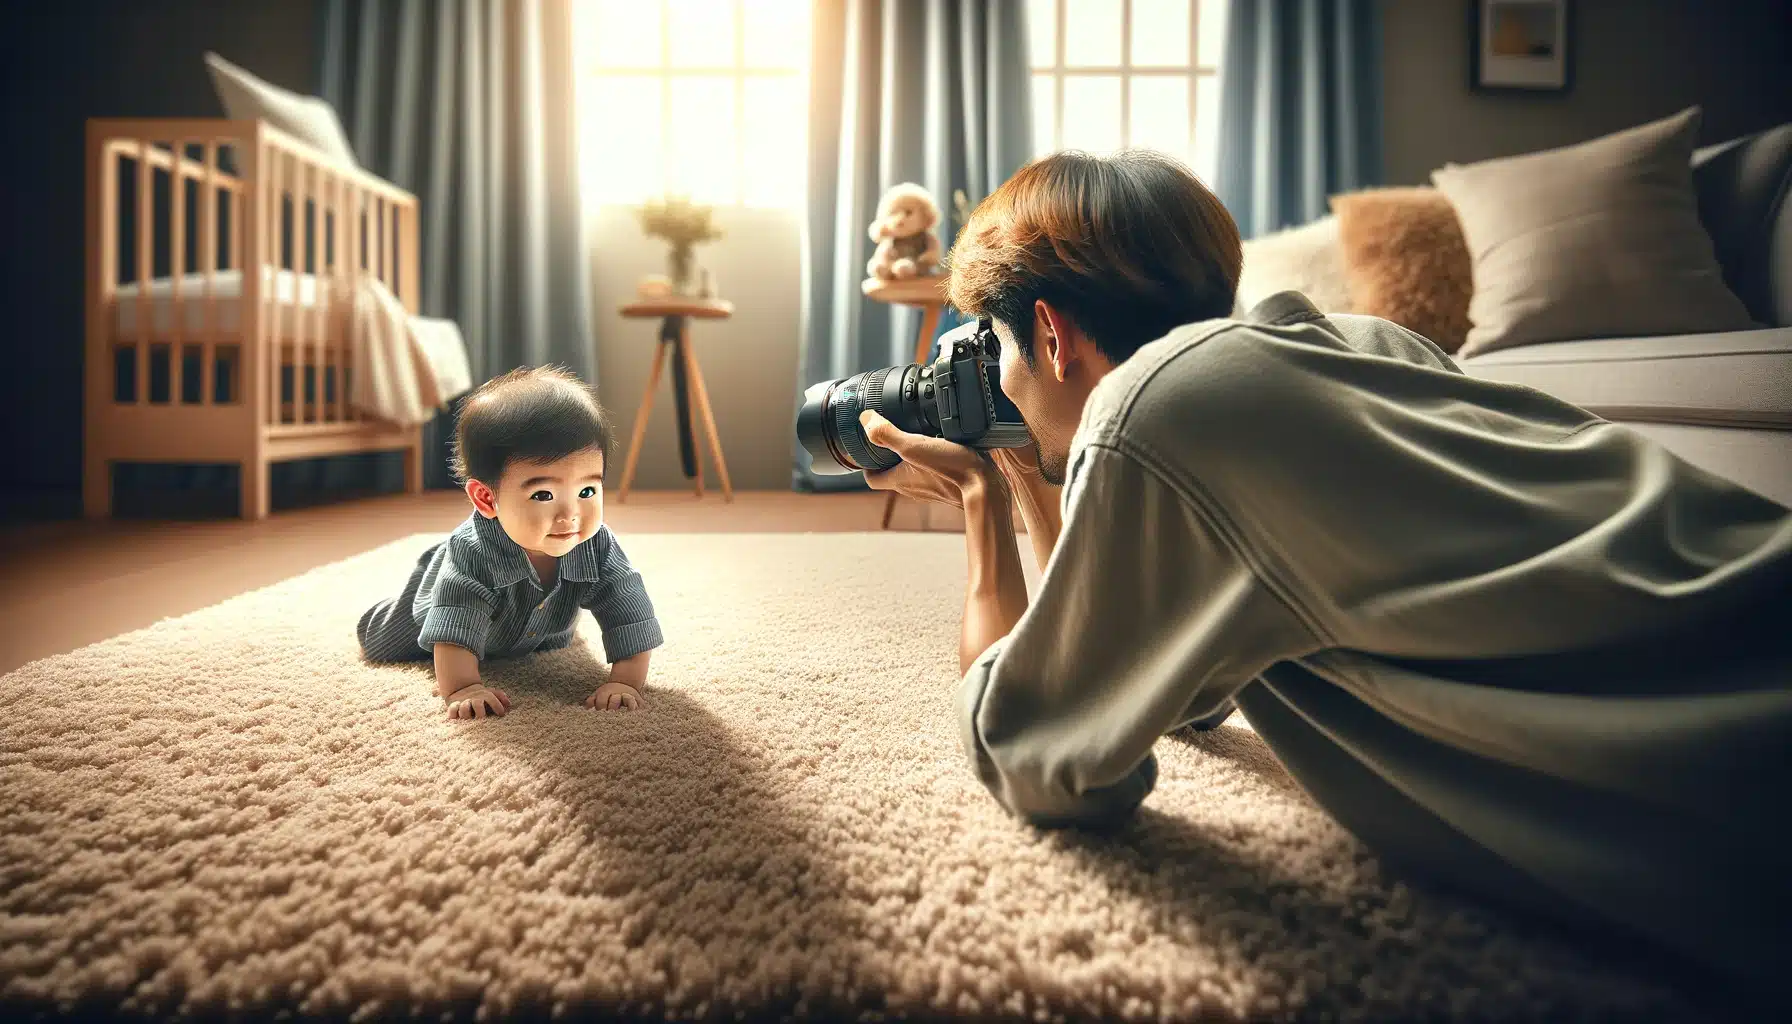 Shooter capturing an adolescence crawling on a carpet in a naturally lit room, highlighting infancy shooting techniques.